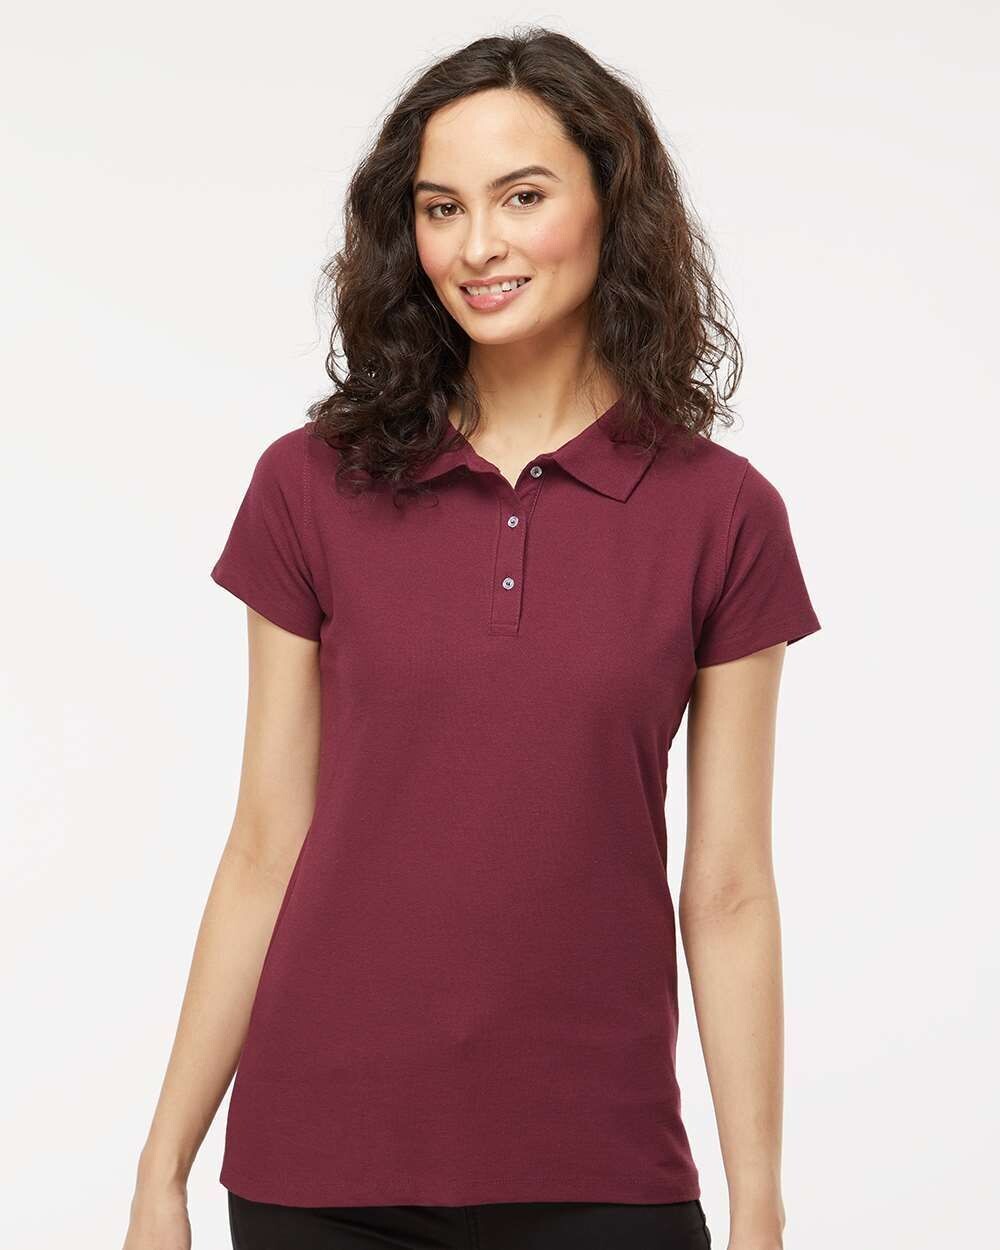 M&O - Women's Soft Touch Polo